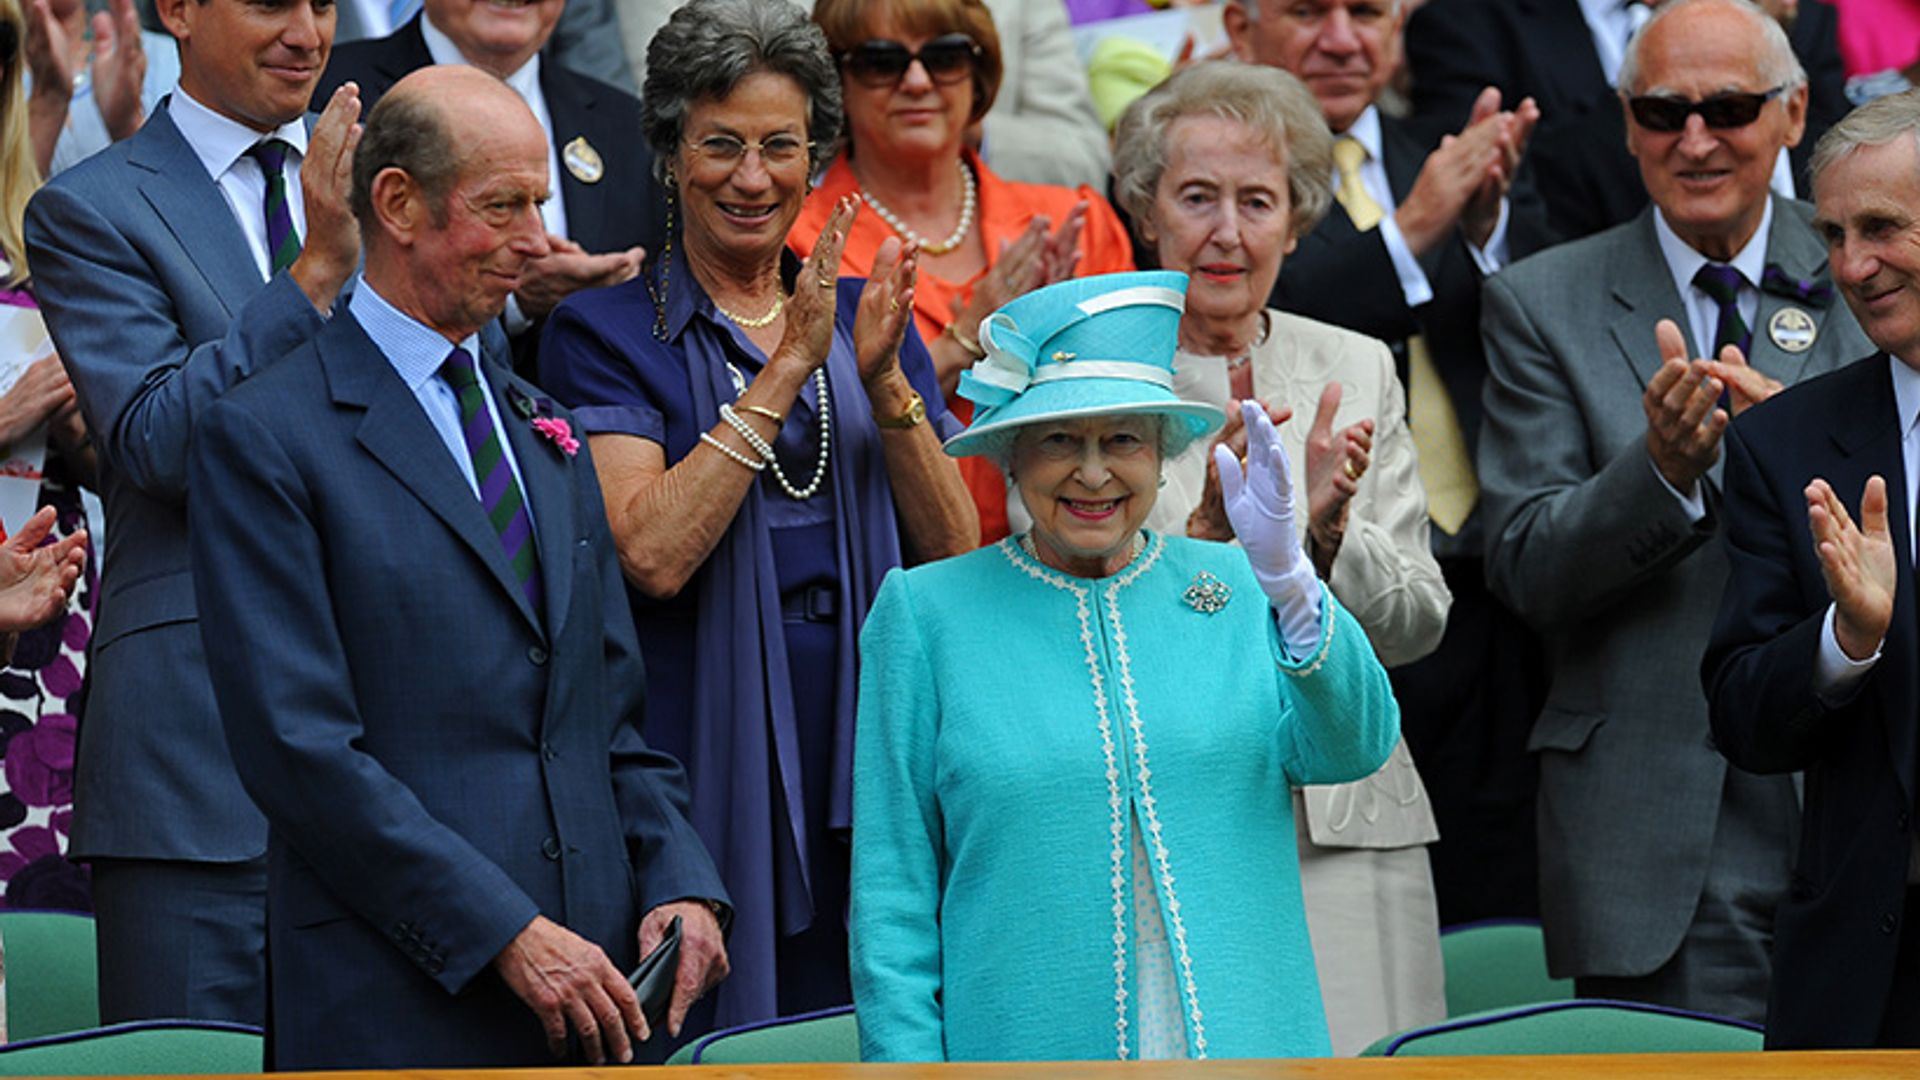 The Queen has only attended Wimbledon four times in her life - here's why